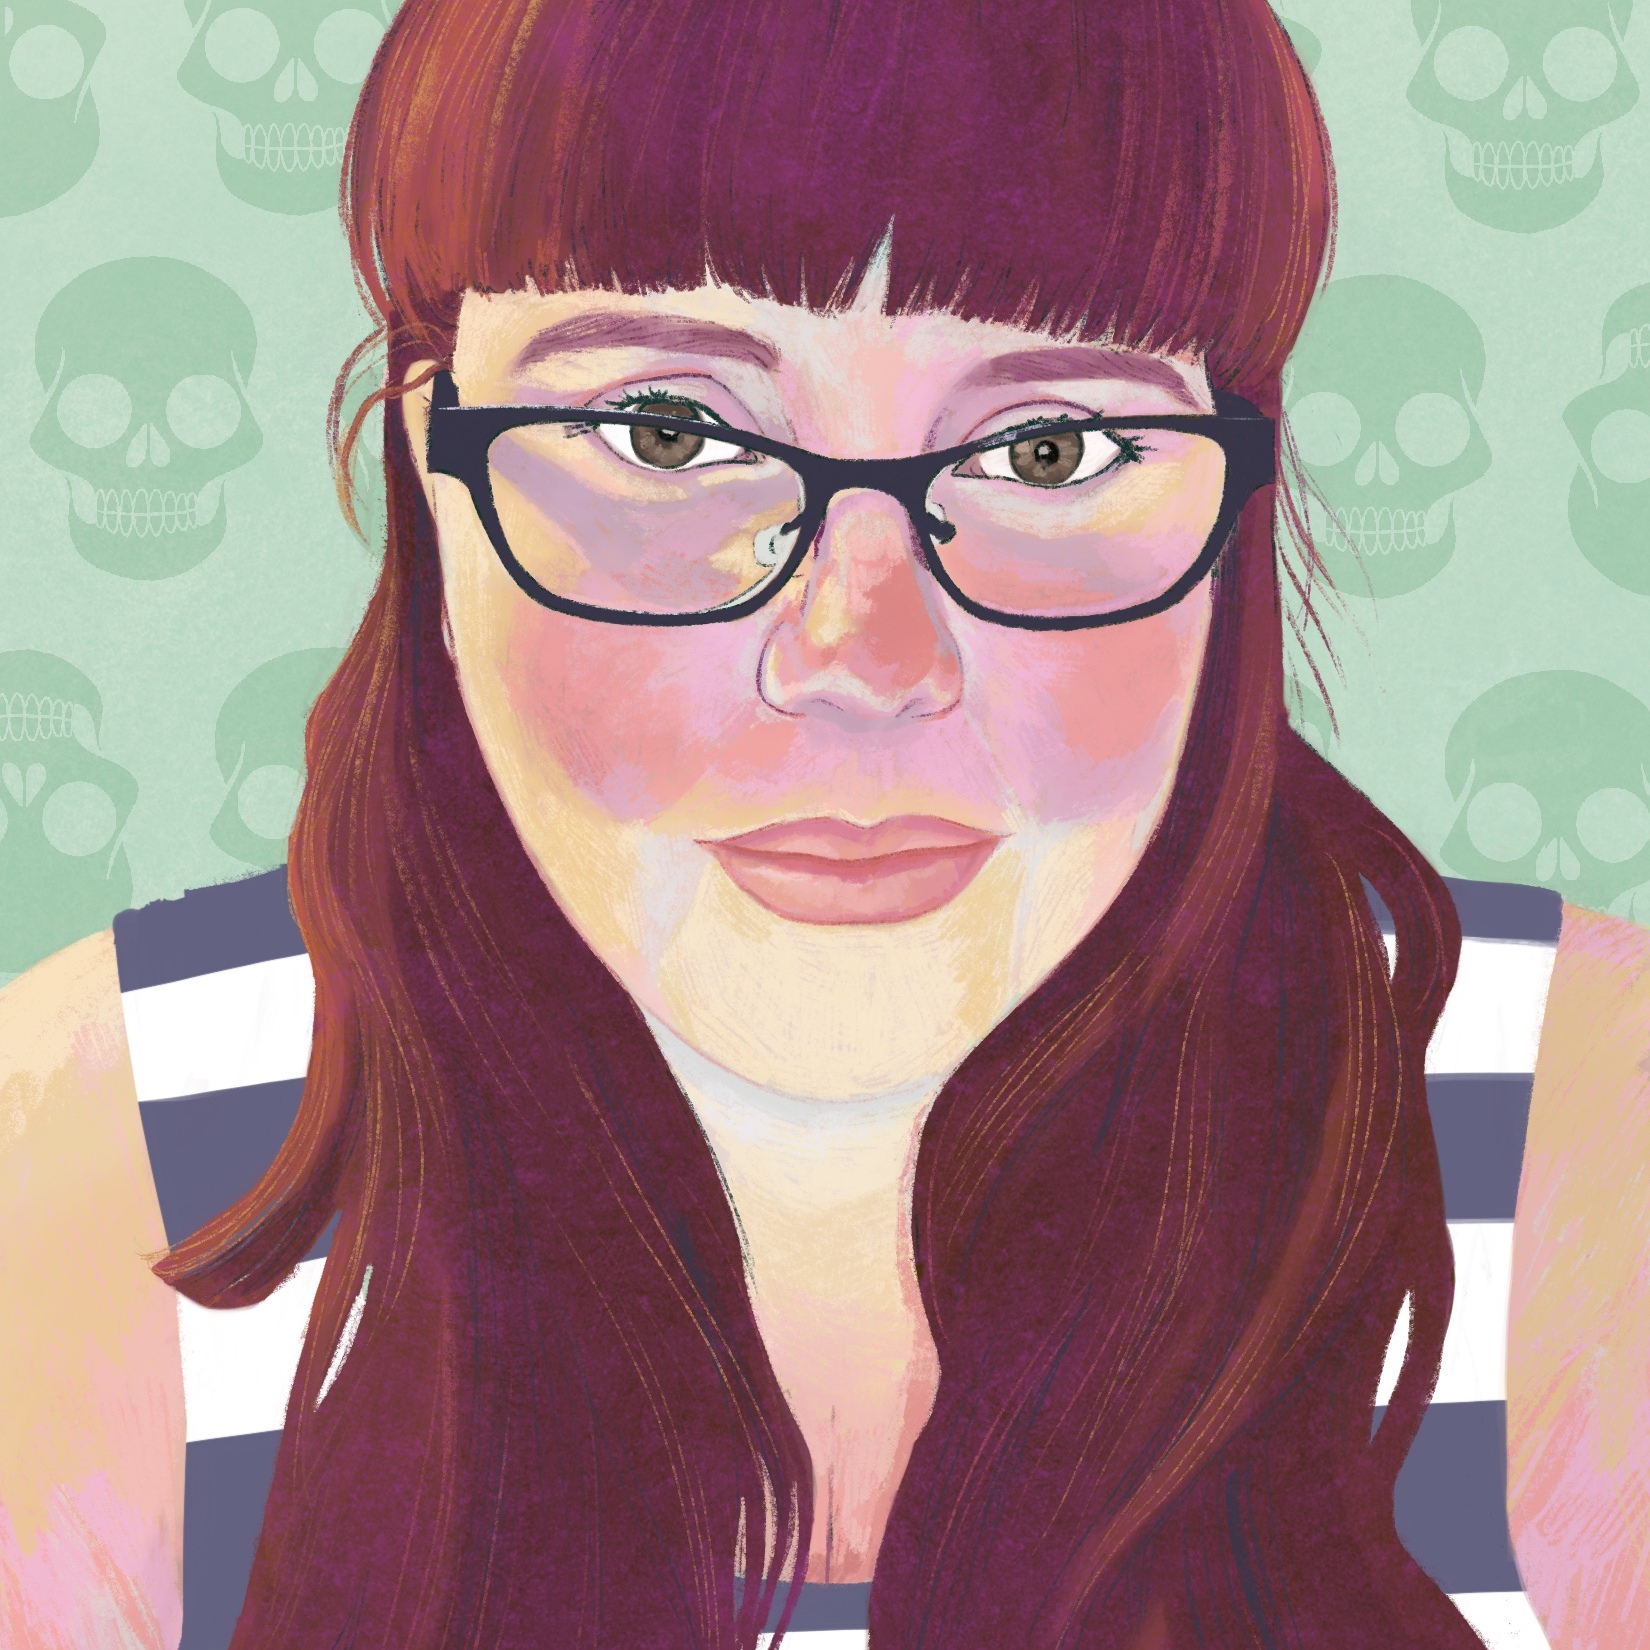 Digital painting of Amber Dawn. She is Caucasian with long red hair and black glasses. She is wearing a white and navy sleeveless top. The background is pastel green with darker green skulls.